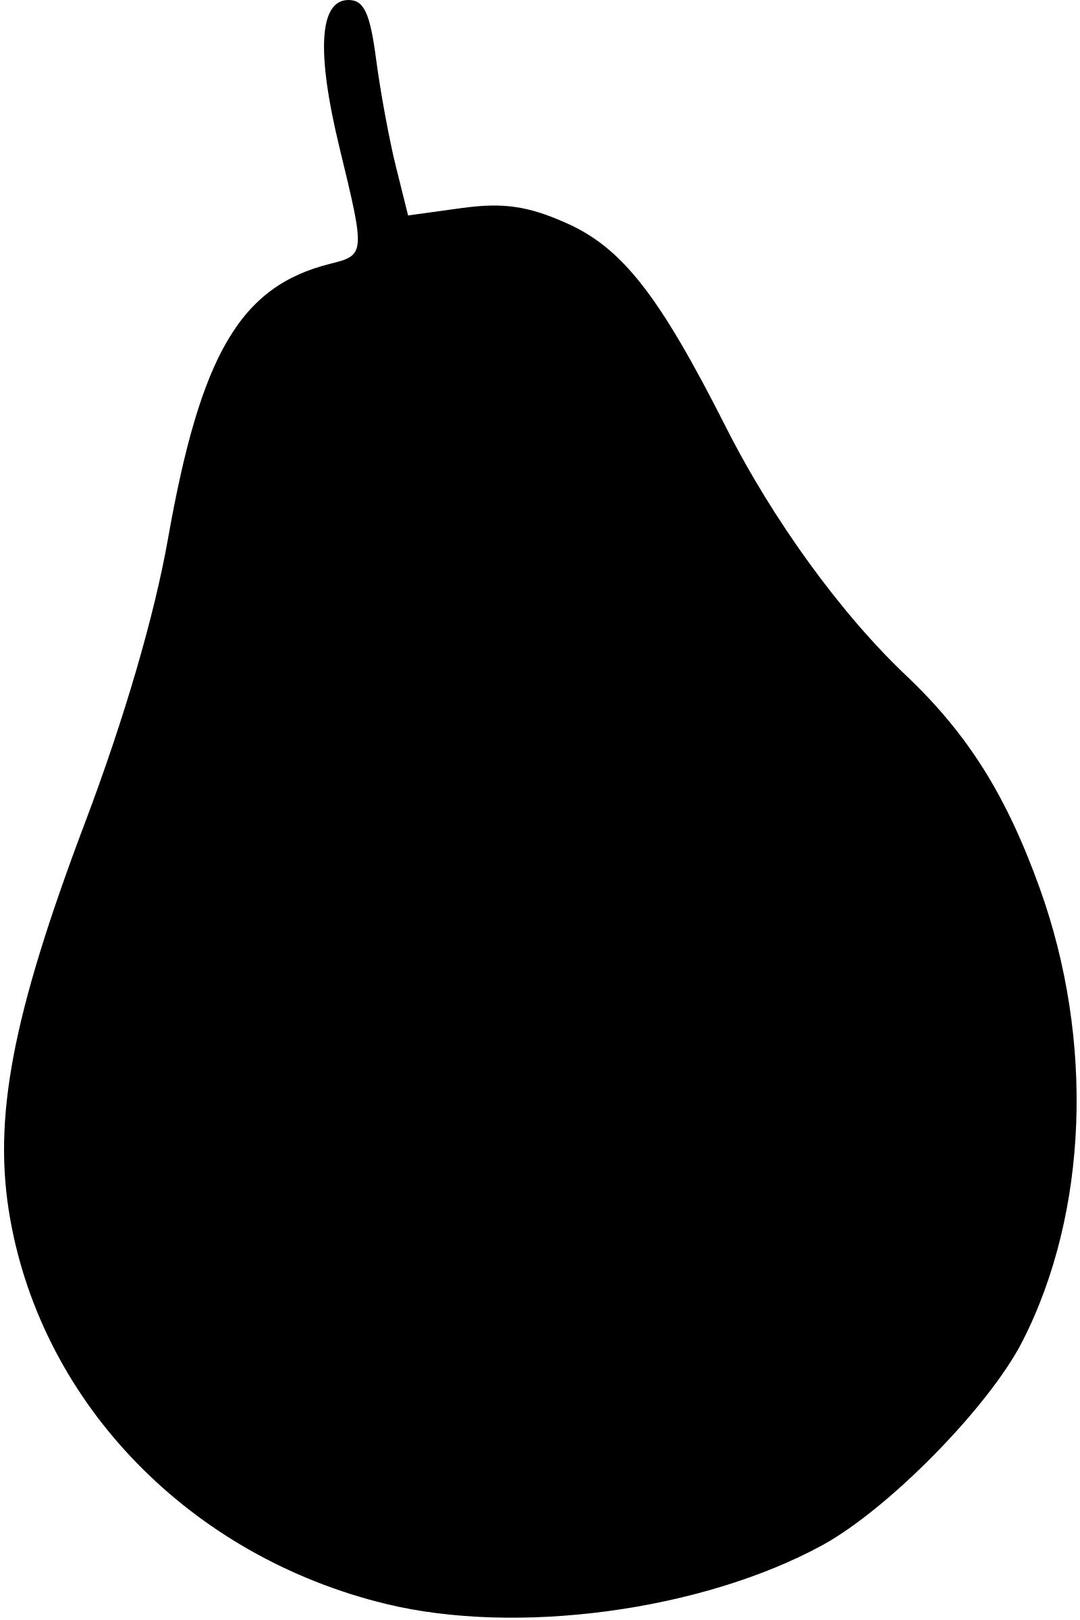 Worcestershire pear png transparent